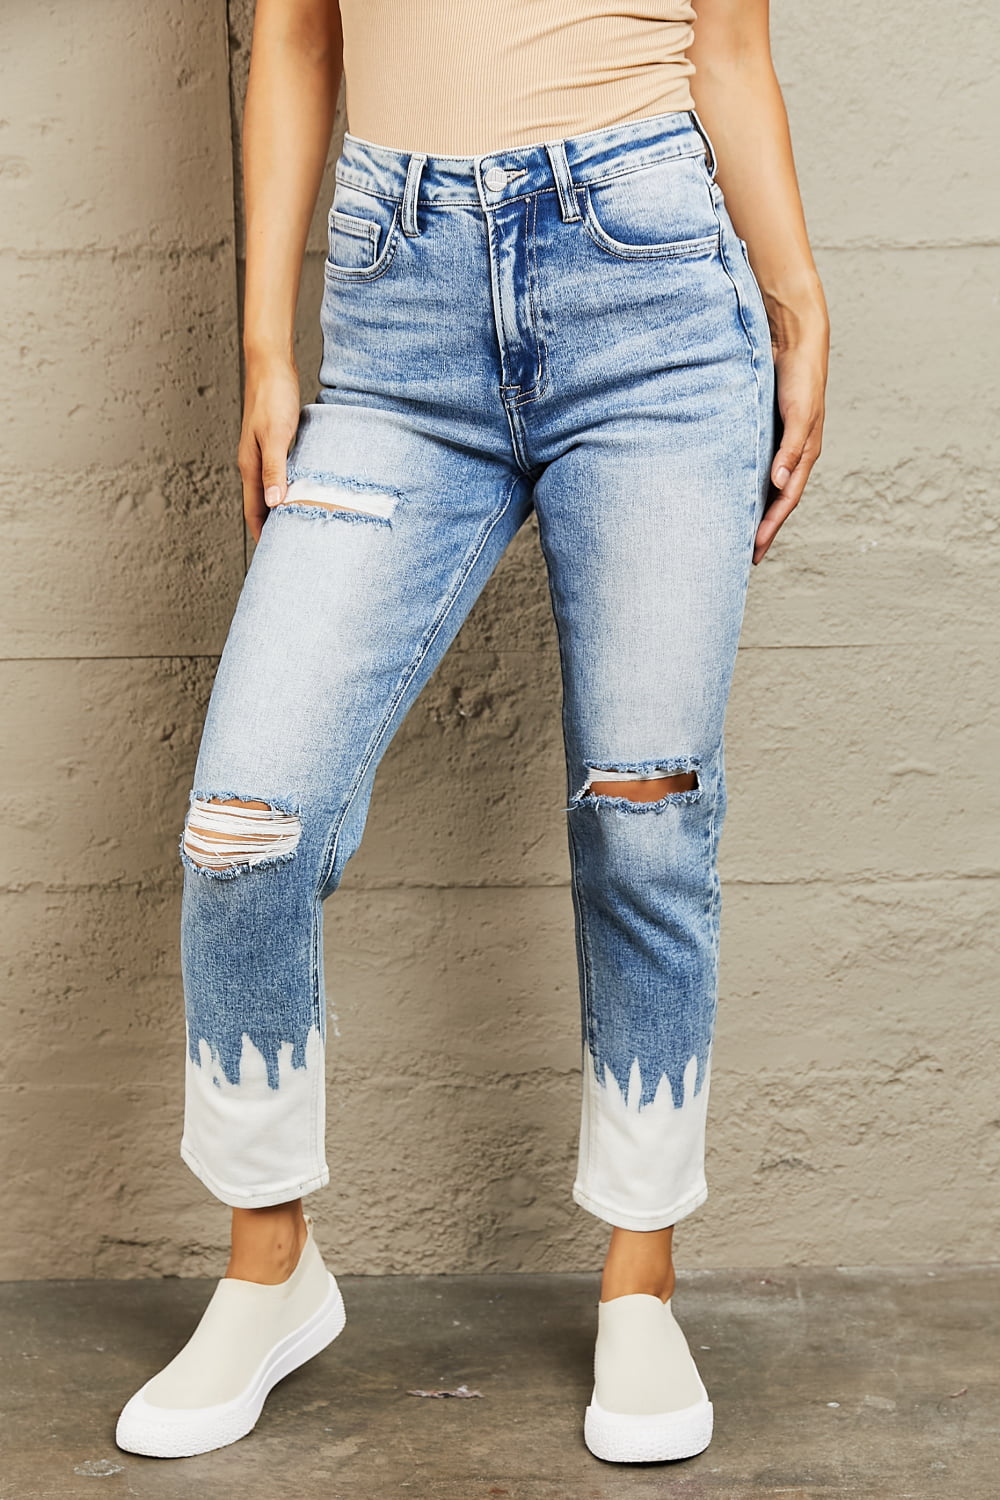 BAYEAS High Waisted Distressed Painted Cropped Skinny Jeans - Jeans - FITGGINS